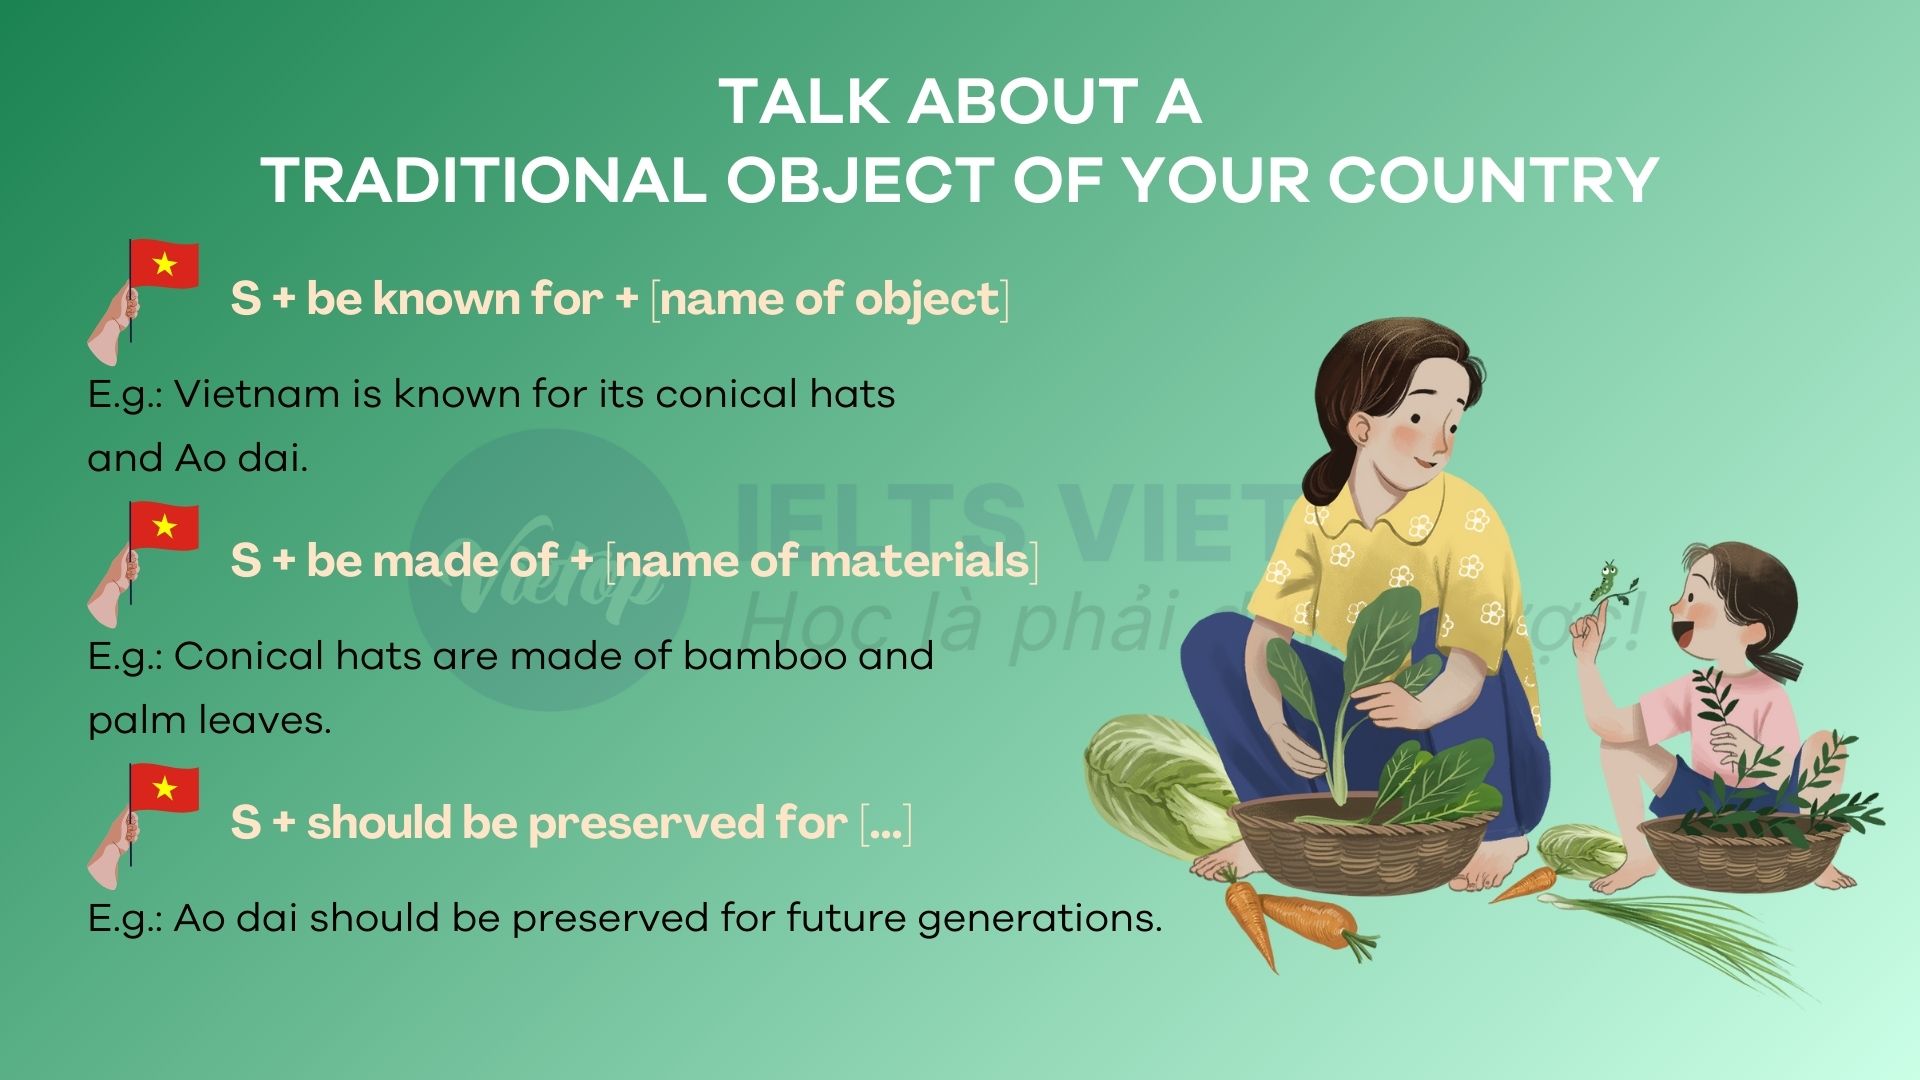 Cấu trúc chủ đề talk about a traditional object of your country